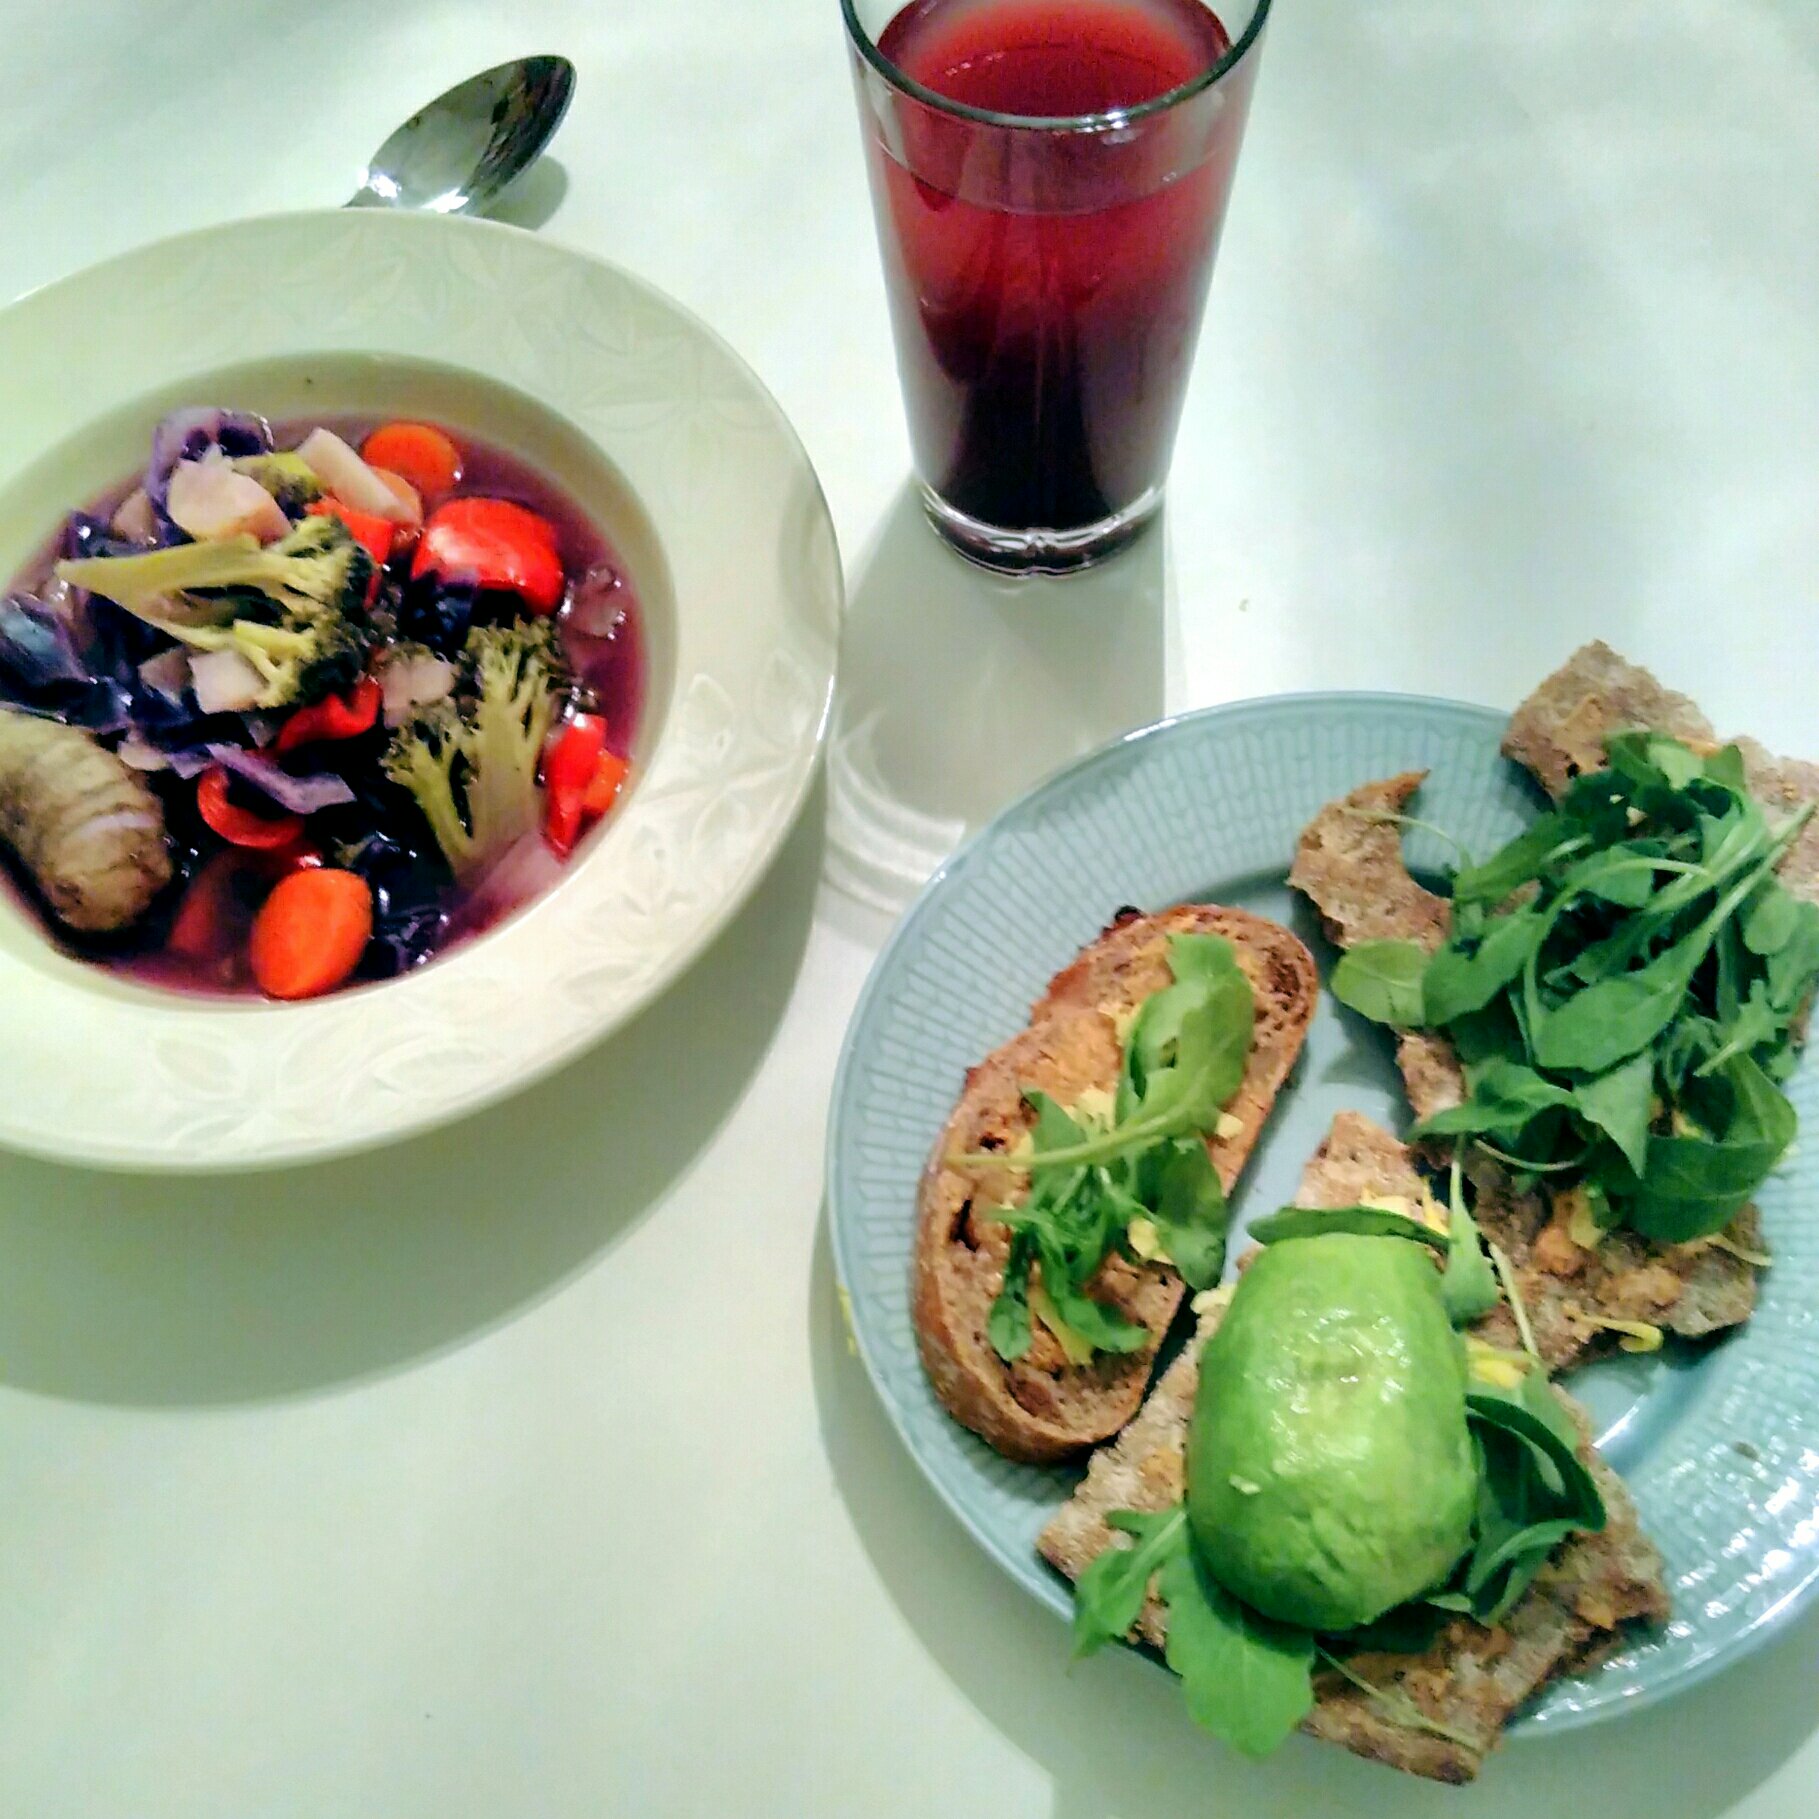 plant-based vegan dinner: rich vegetable soup, bread with peanut butter, rucola and avocado. Blueberry juice diluted with water, 1:5